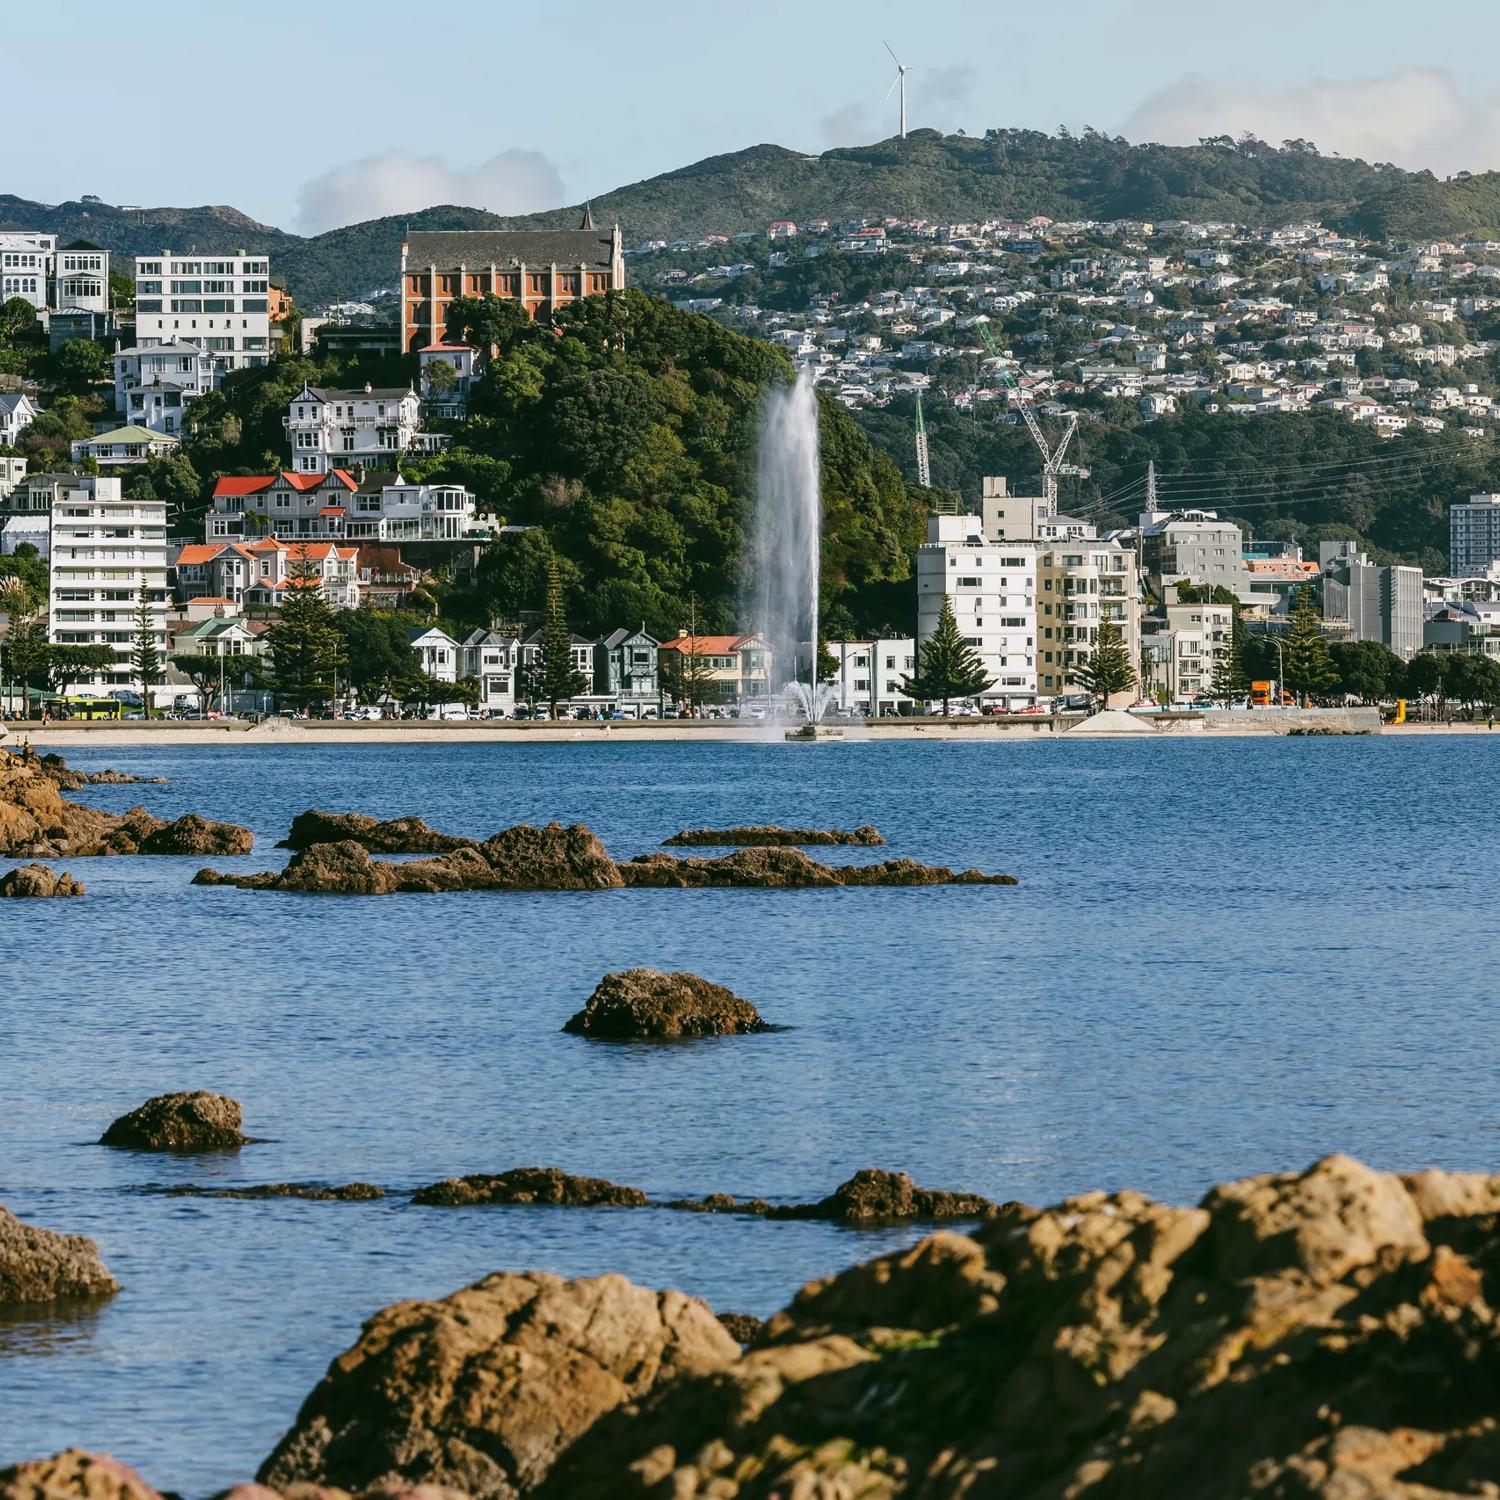 Looking towards Oriental Bay over some rocks, the fountain can be seen as well as the beach, houses, the city in the background, and Freyburg pools.